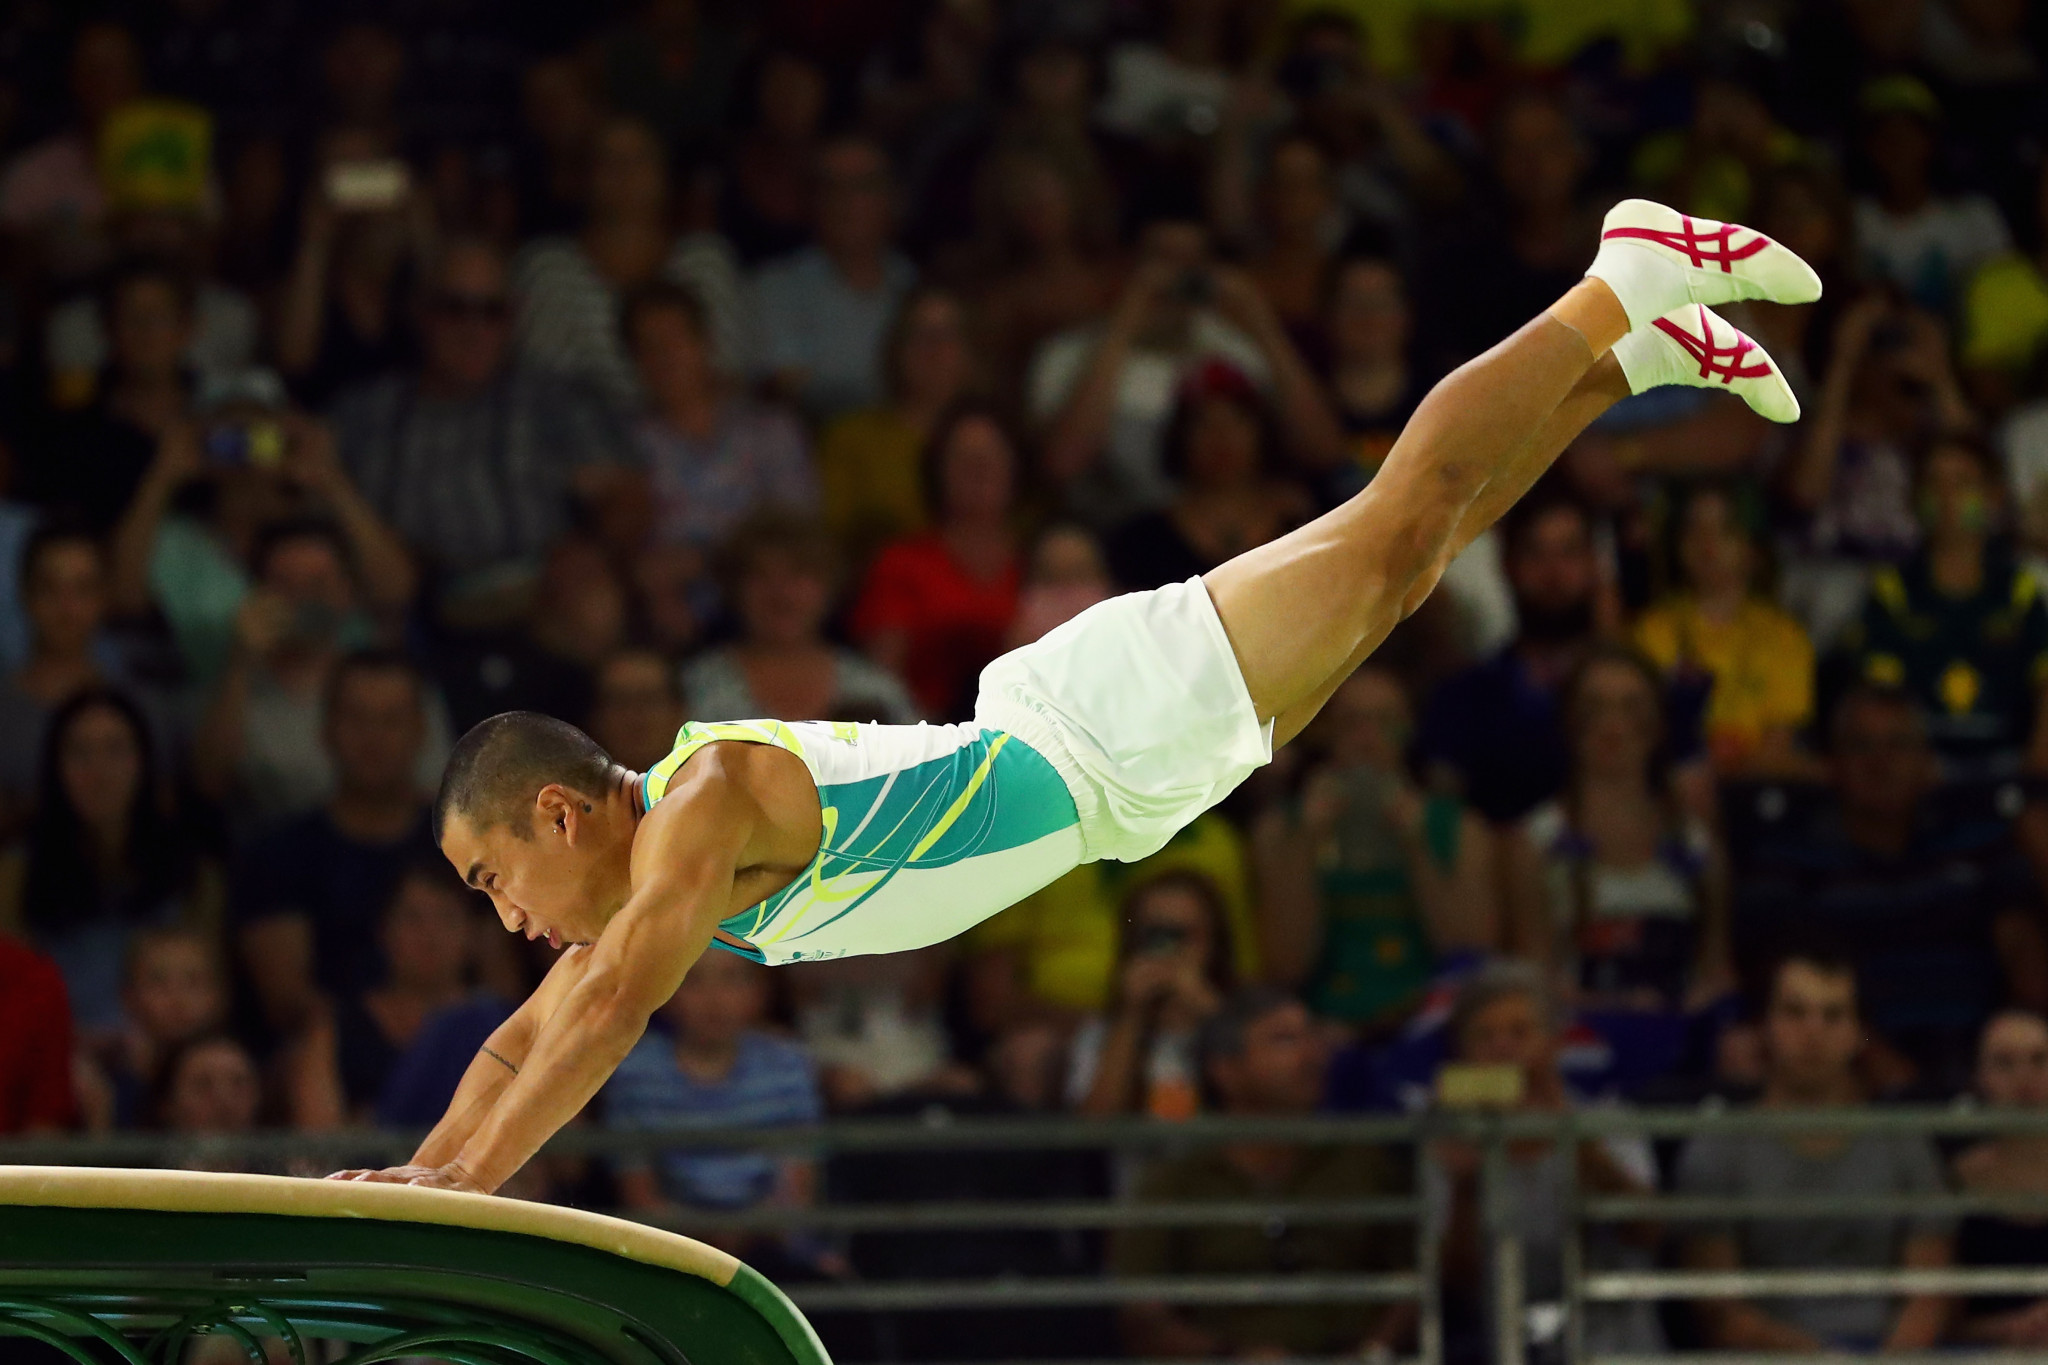 Christopher Remkes claimed Australia's first artistic gymnastics gold medal with victory in the vault final ©Getty Images